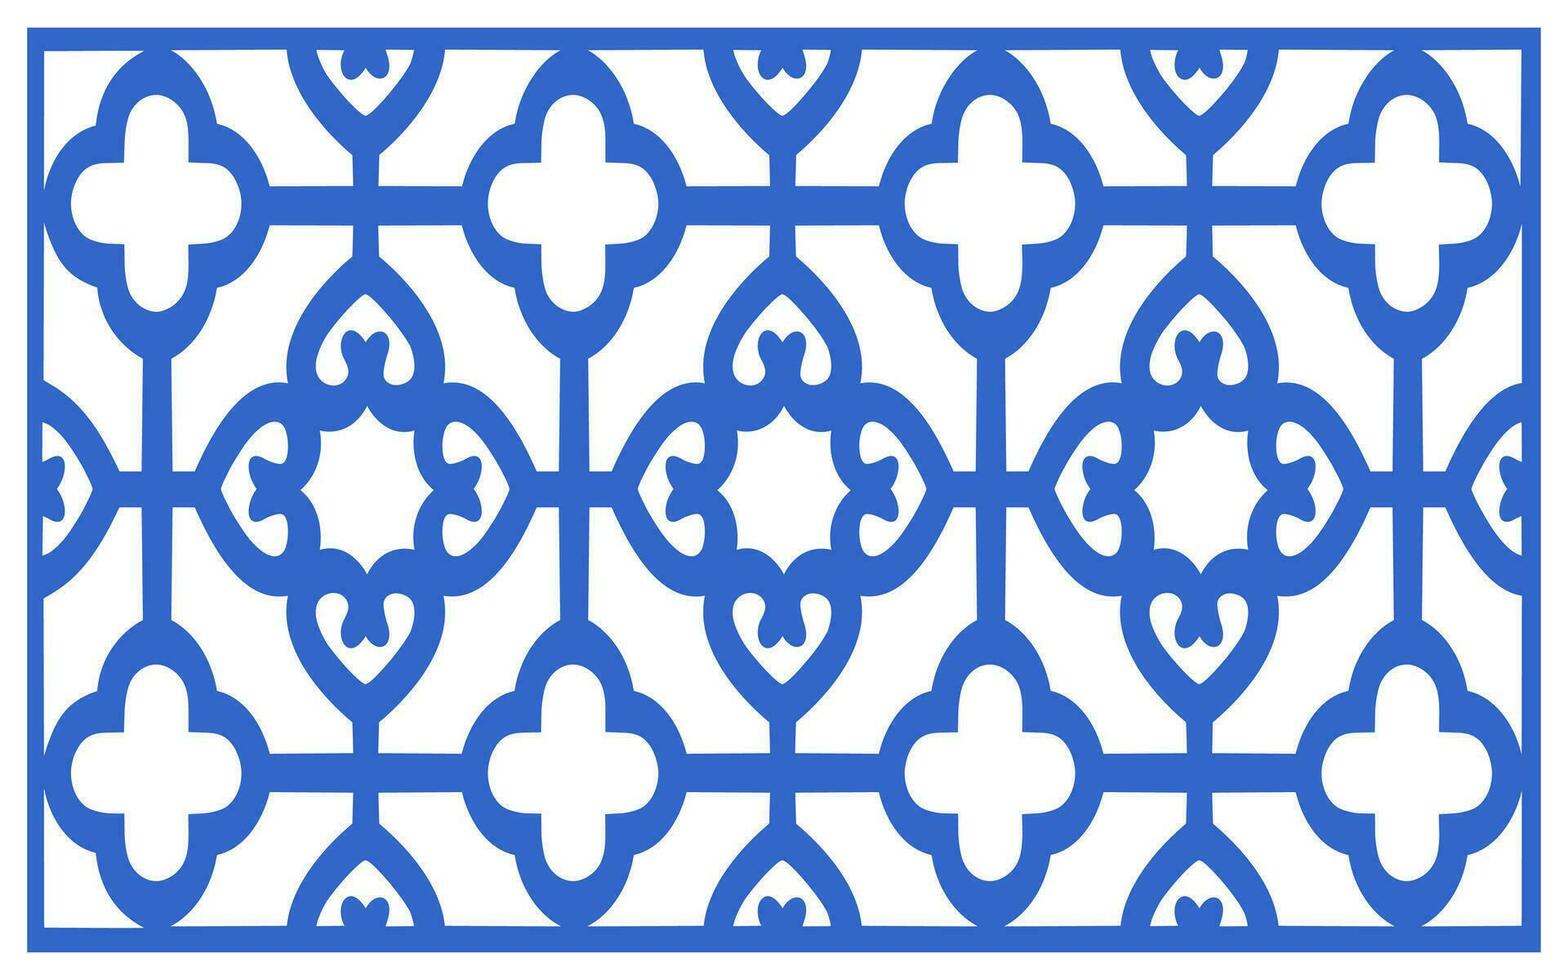 Decorative floral patterns, geometric template for cnc laser cutting vector